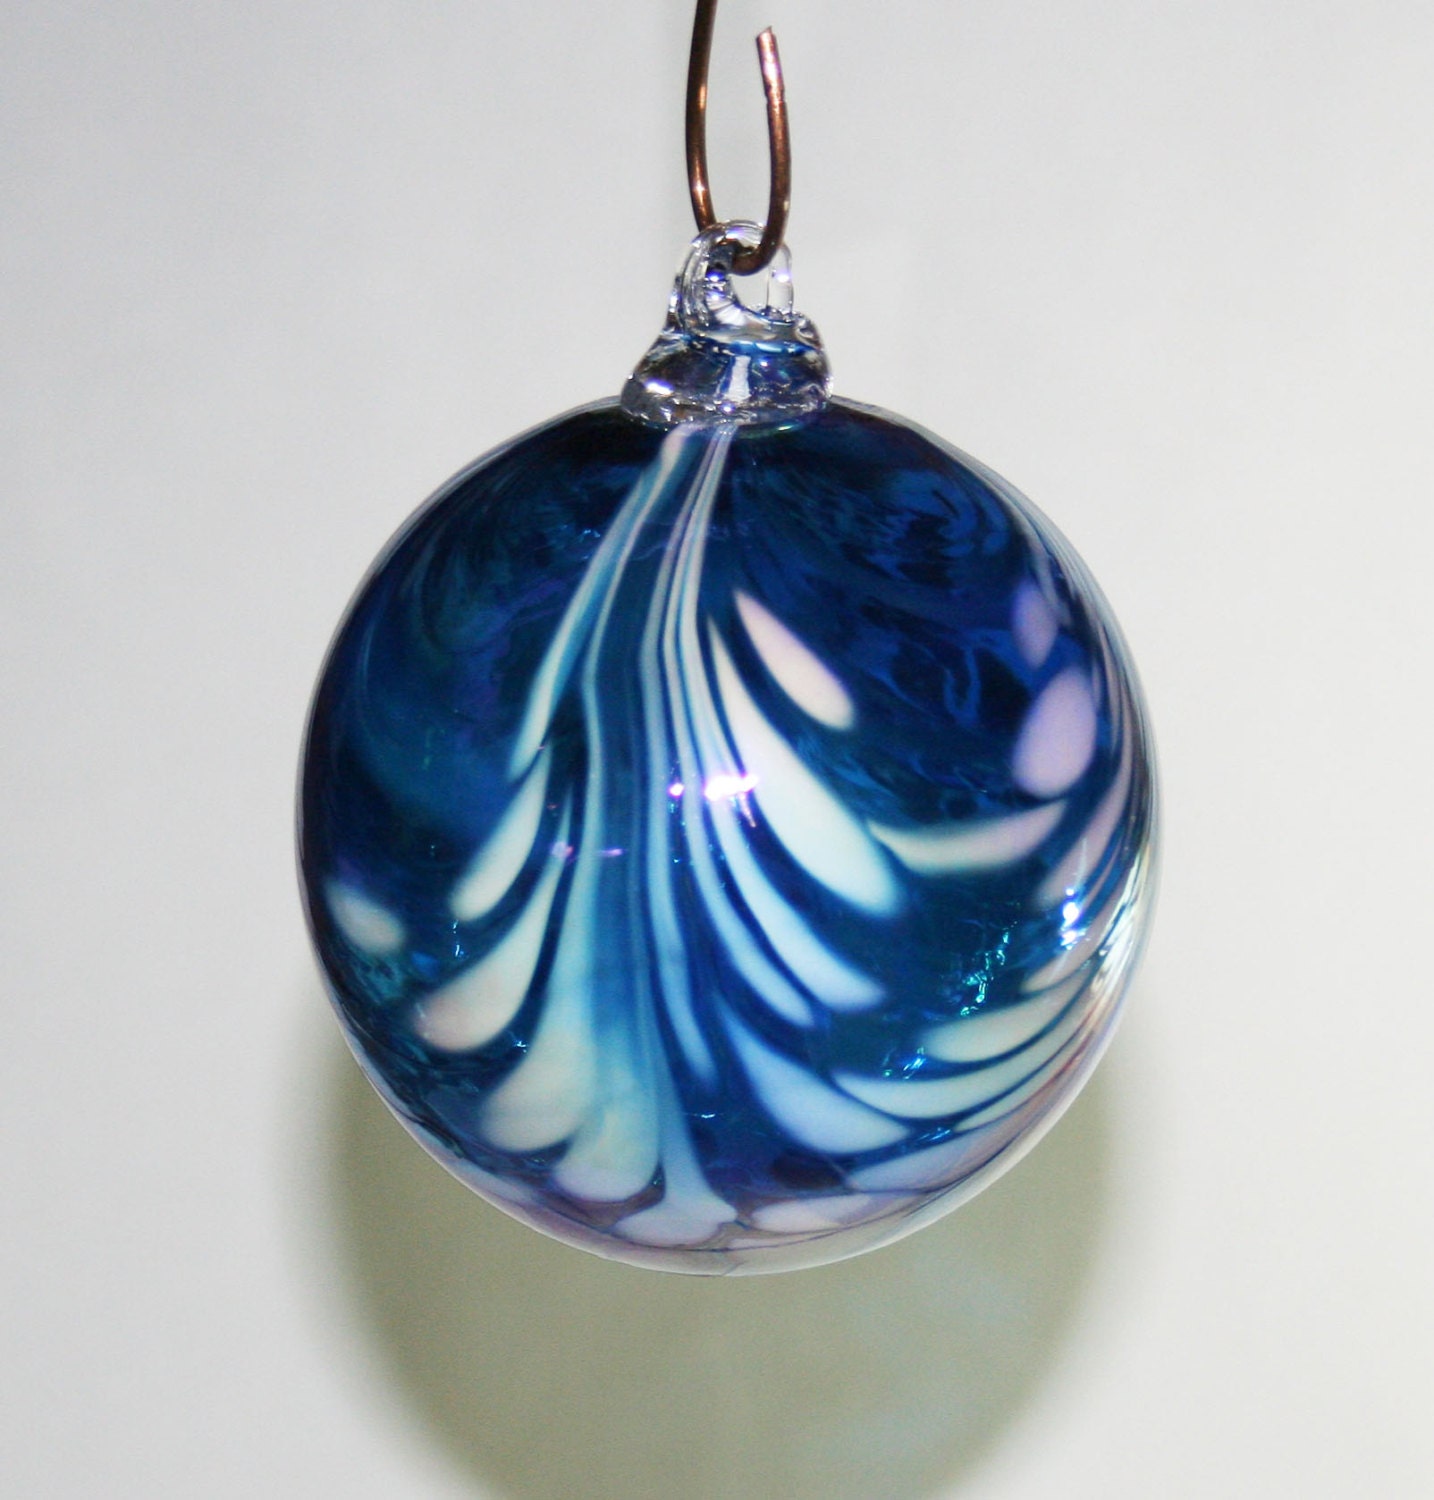 Hand Blown Glass Christmas Ornaments By Kevinfultonglass On Etsy